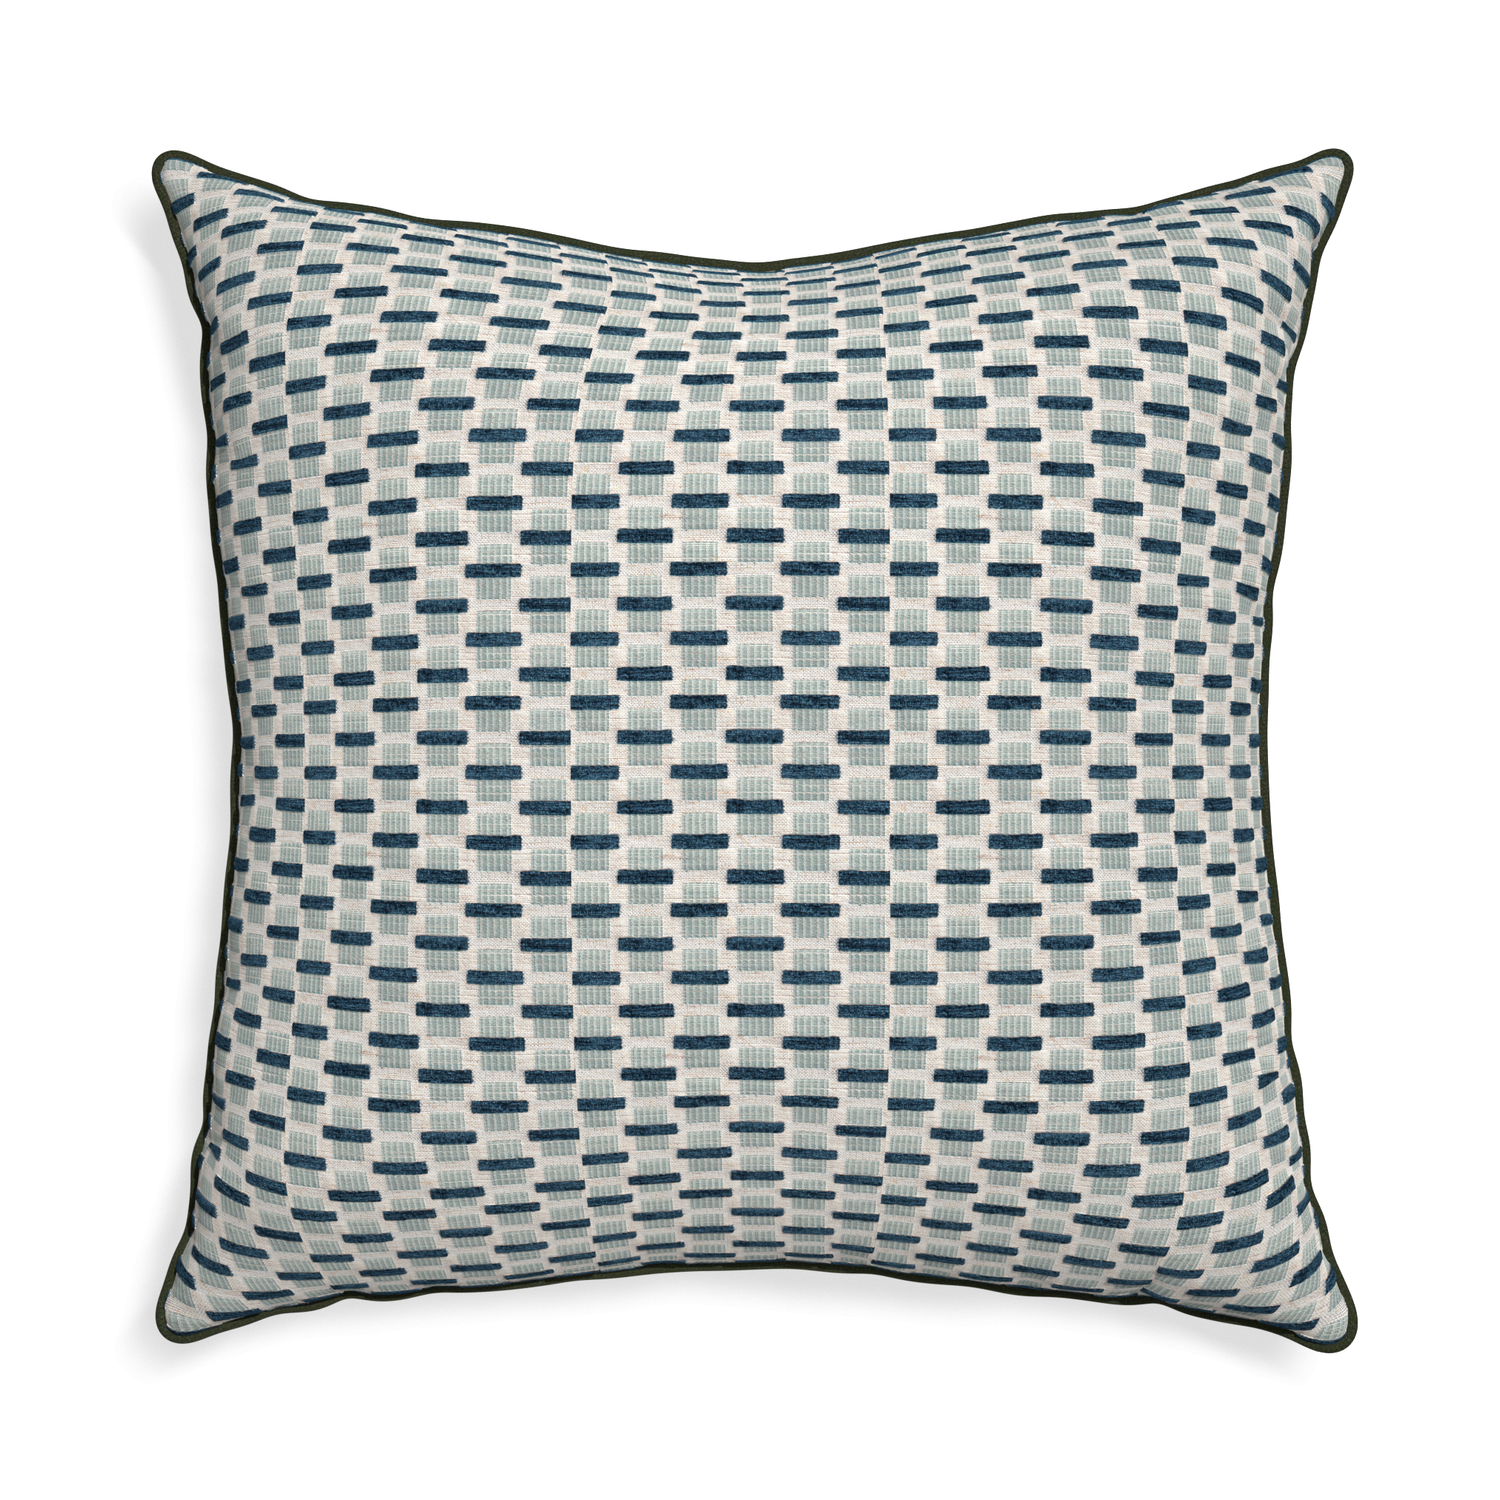 Euro-sham willow amalfi custom blue geometric chenillepillow with f piping on white background